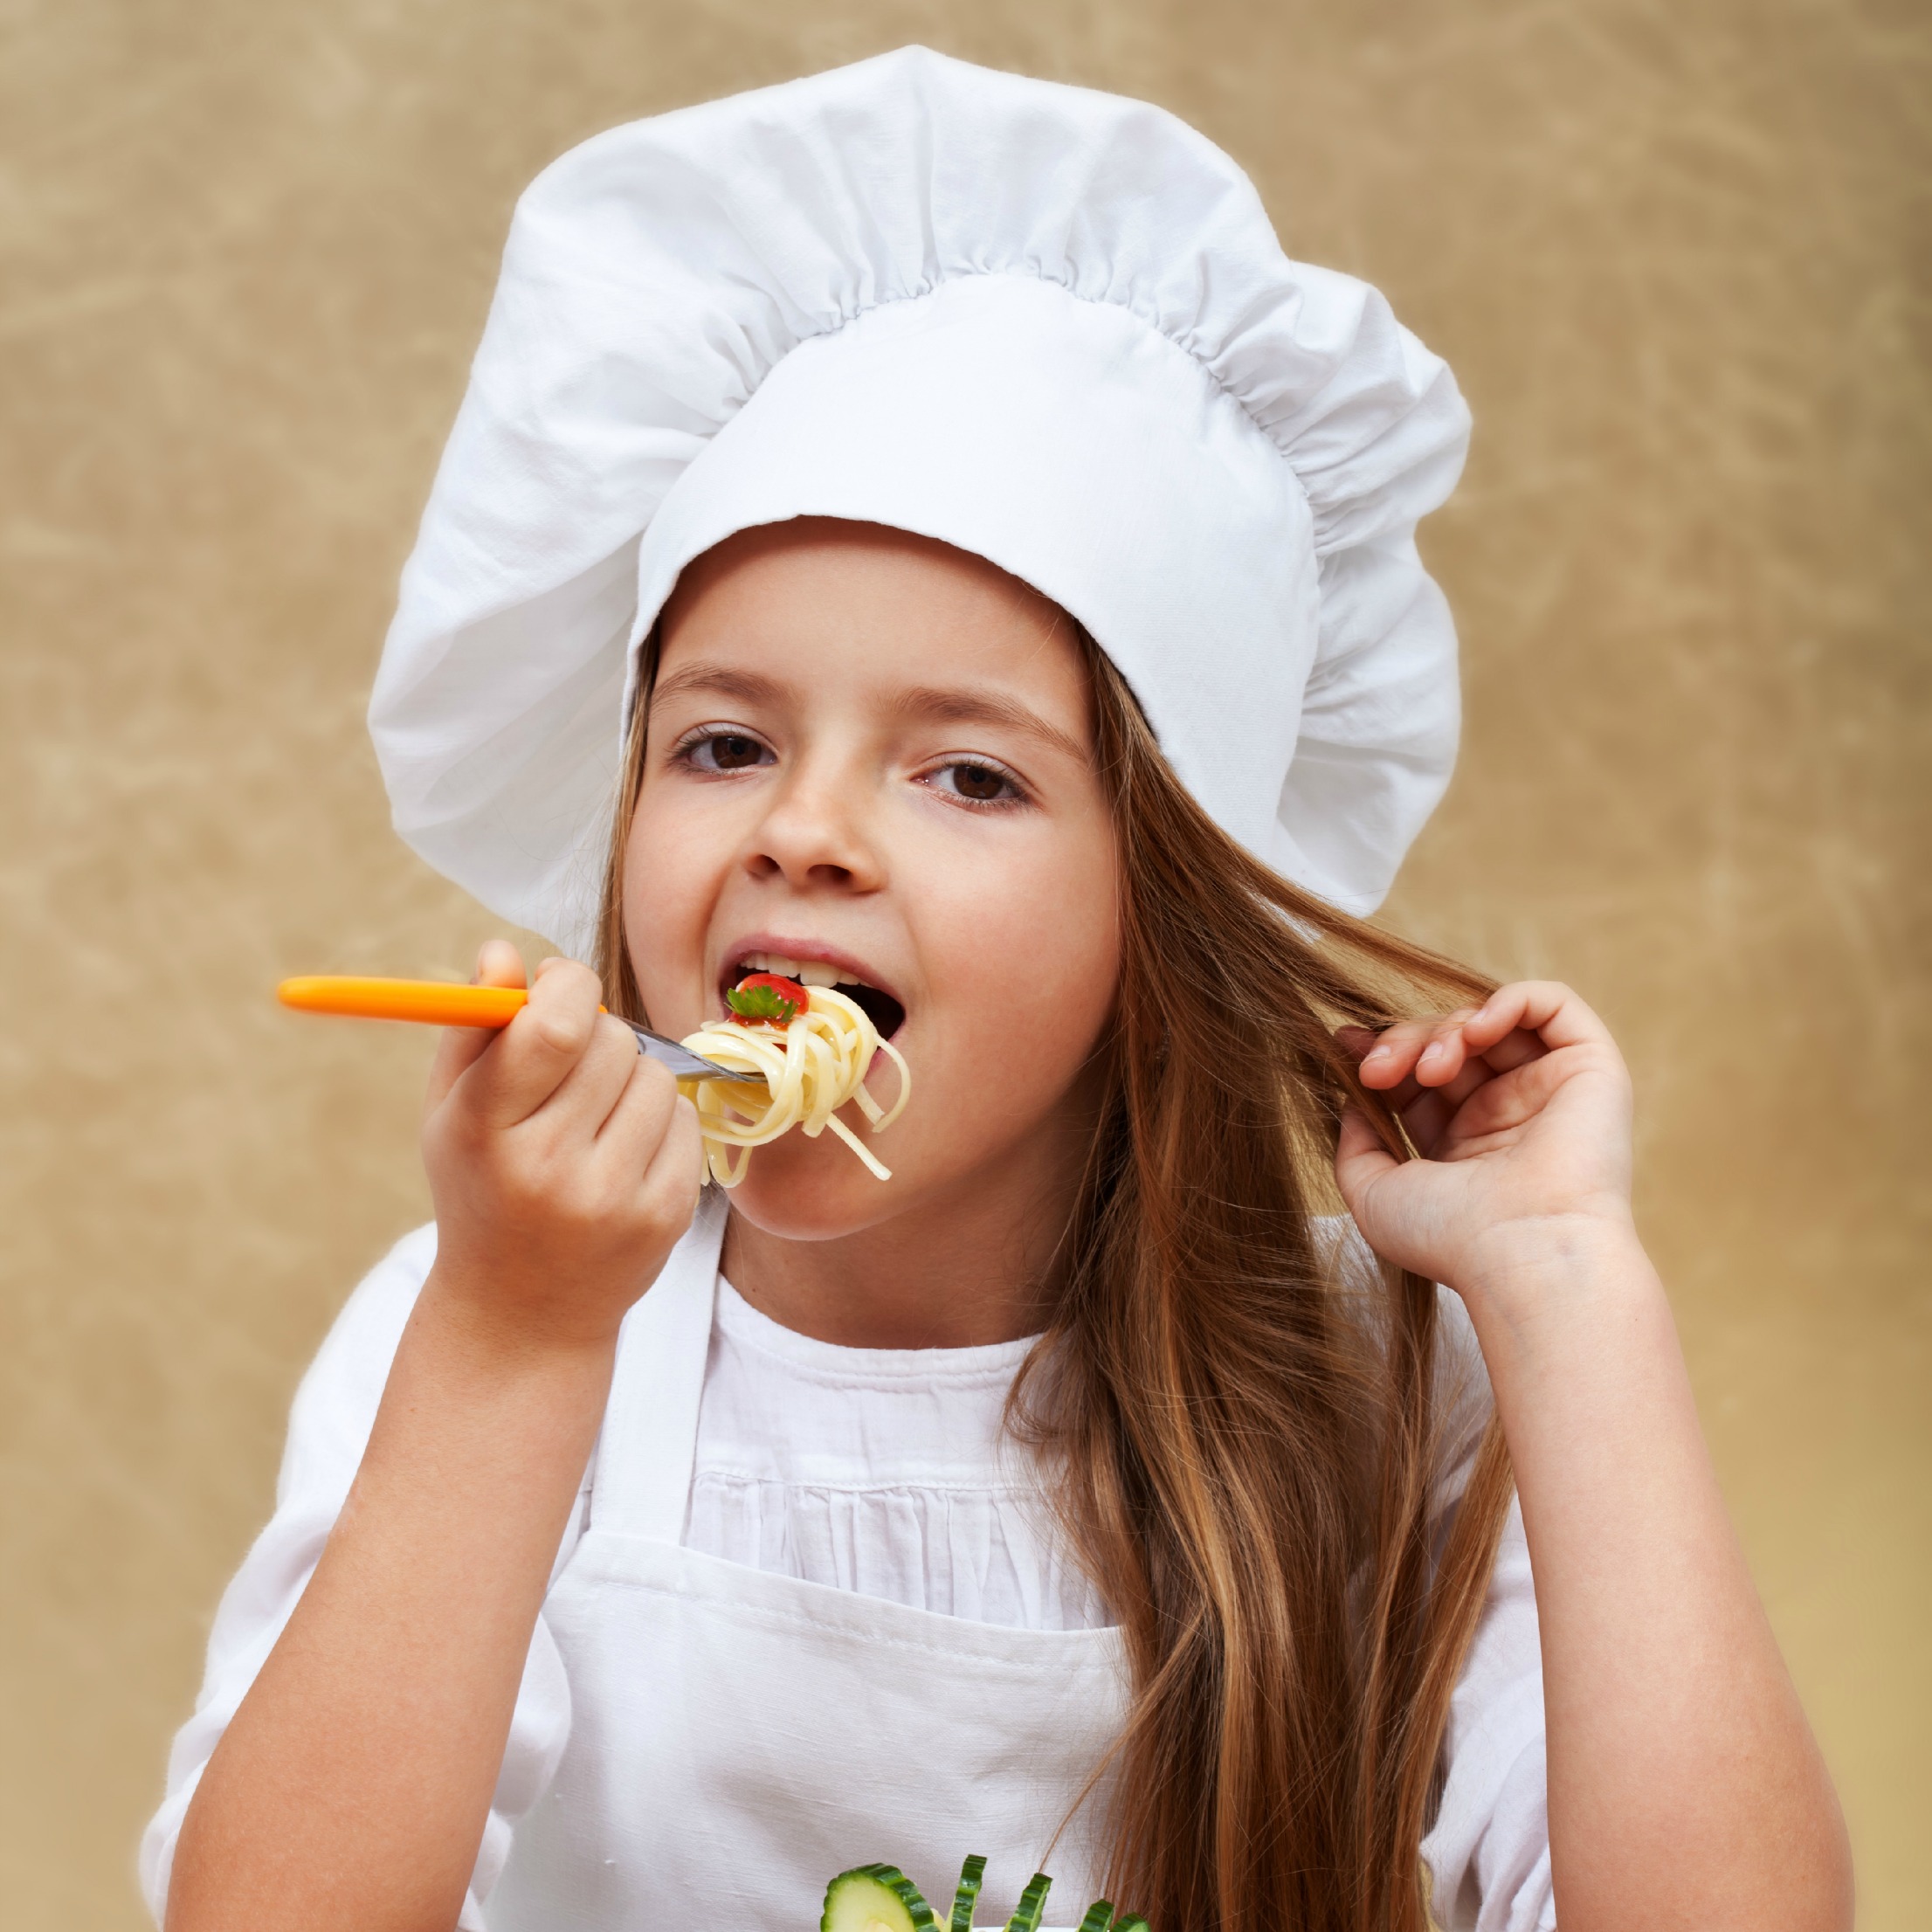 7 Simple Tips to Get Your Fussy Eater to Eat Healthy